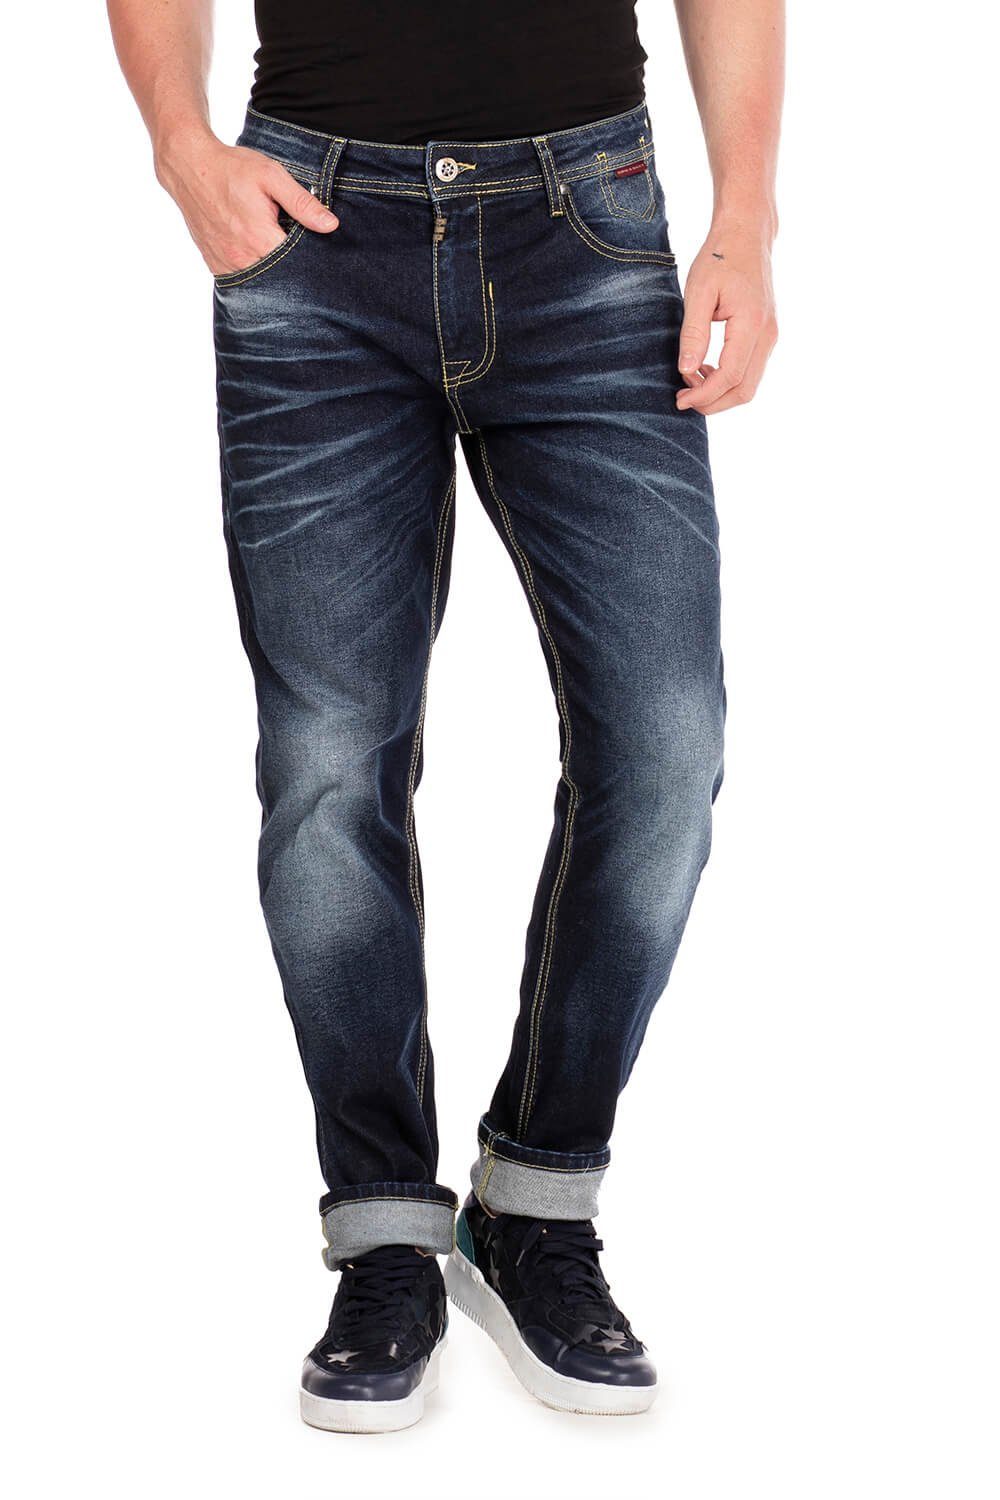 Cipo & Baxx Slim-fit-Jeans im Fit in Straight Washed-Look